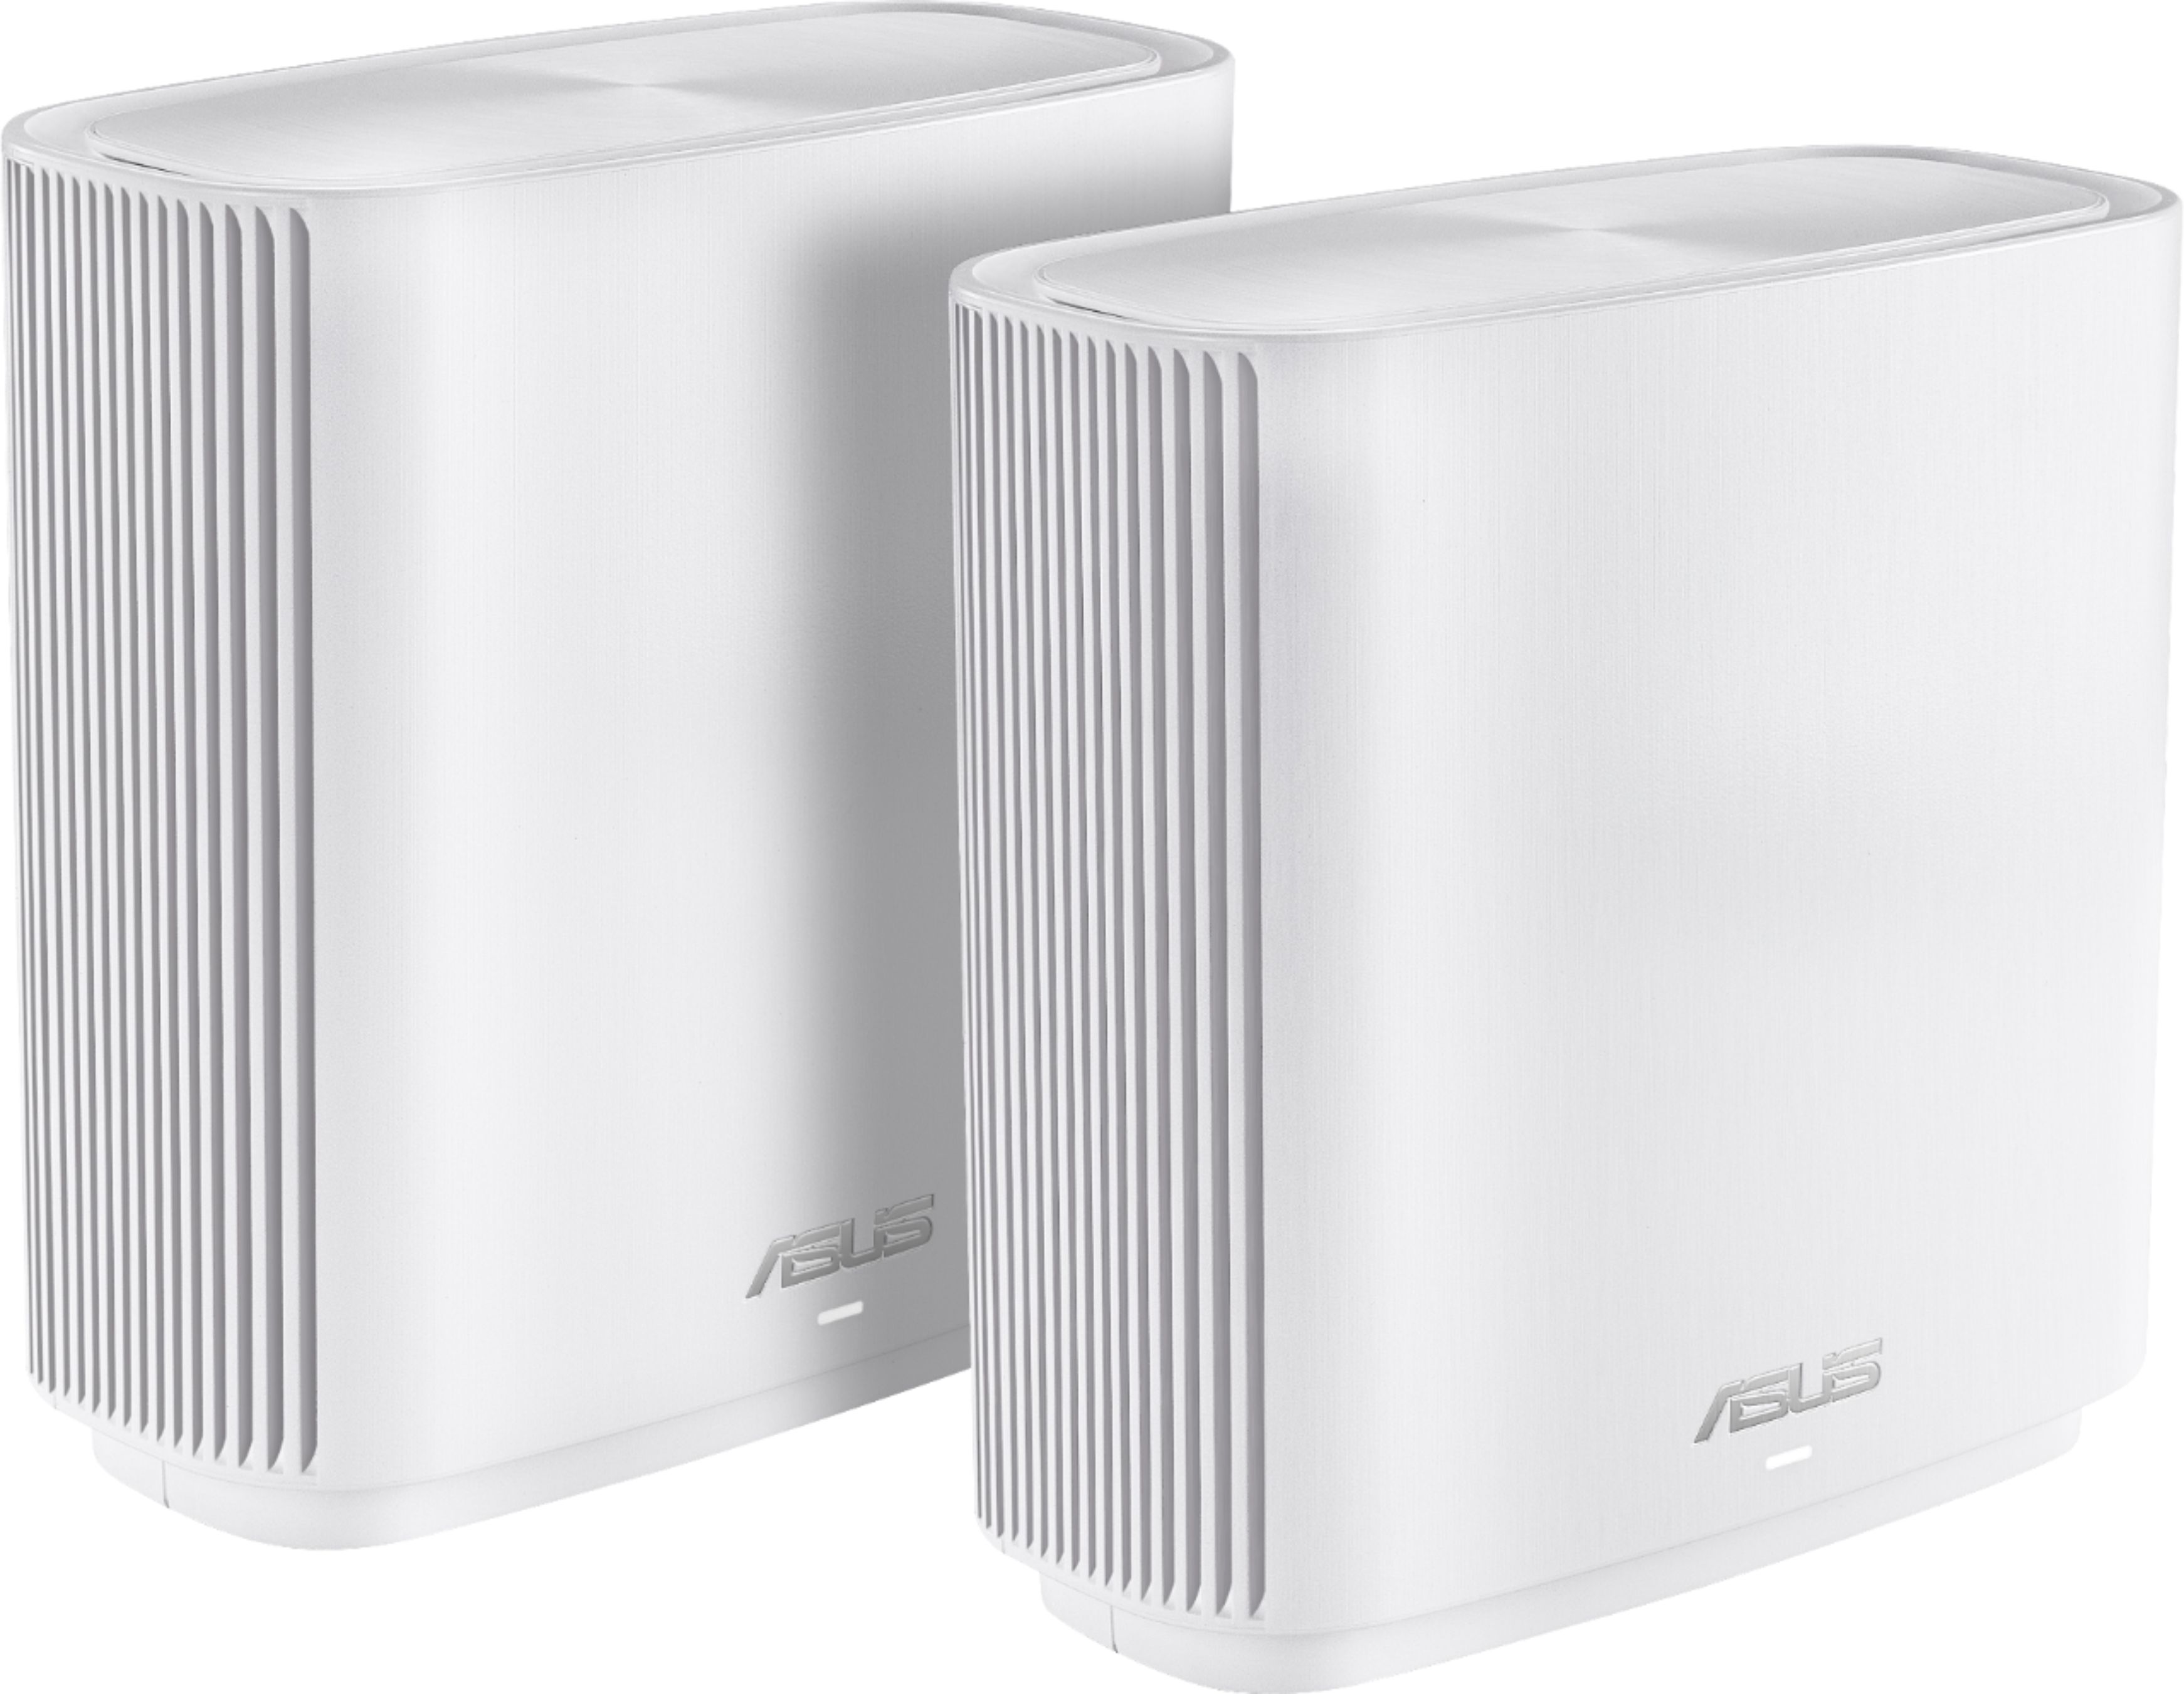 ASUS - ZenWiFi AC Tri-Band Mesh Wi-Fi Router (2-pack) - White